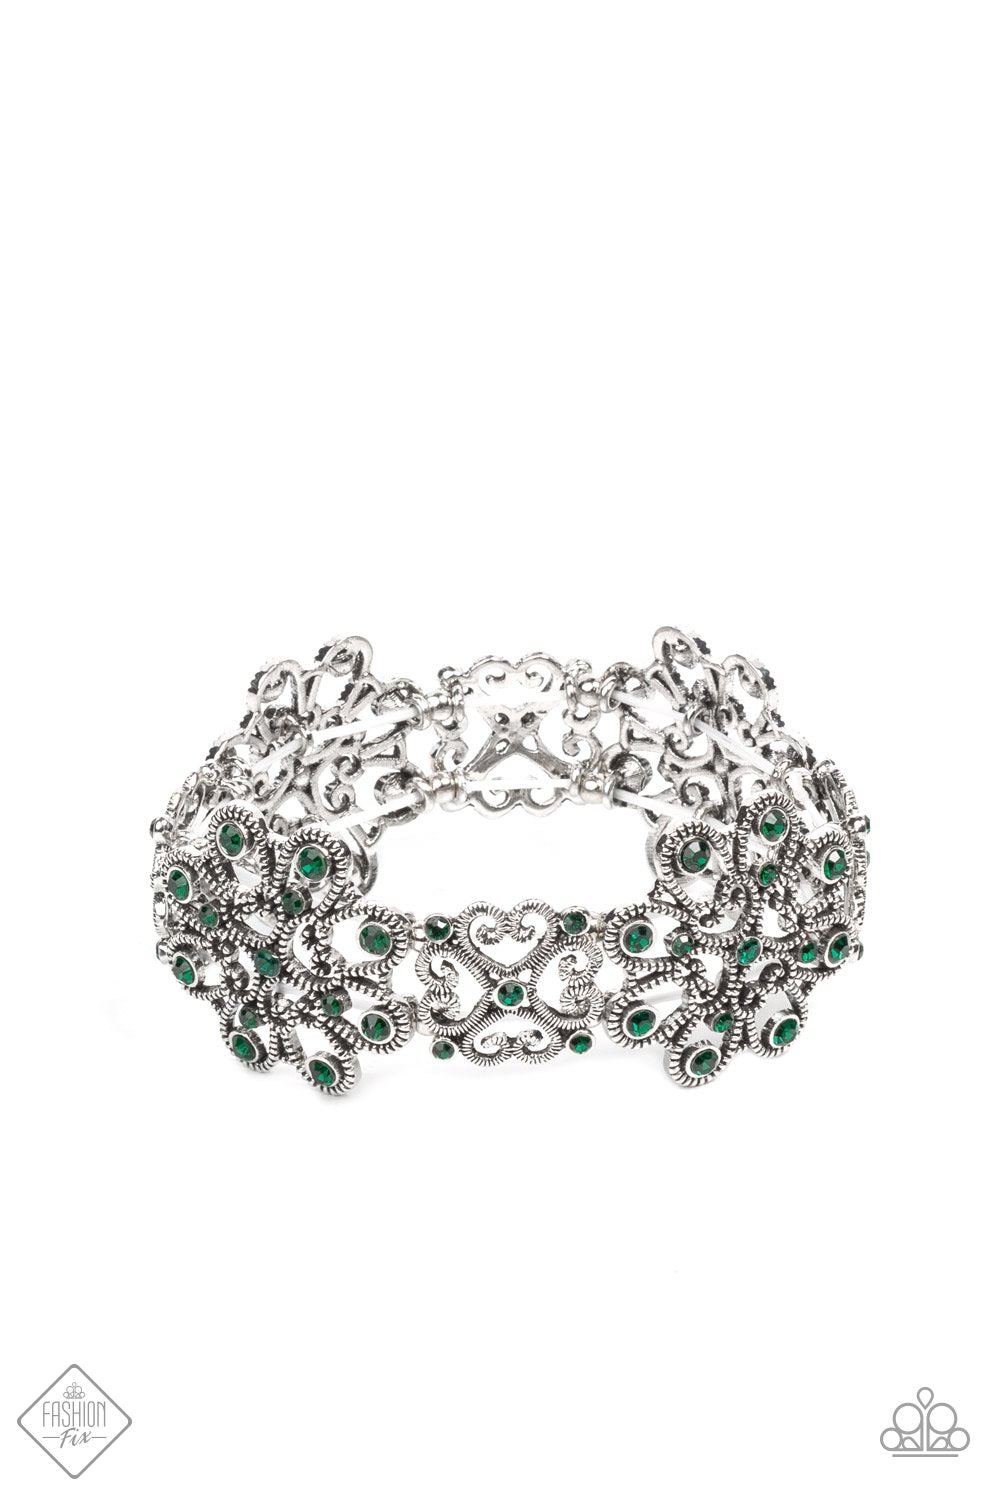 Regal Recognition Green Rhinestone and Silver Filigree Bracelet - Paparazzi Accessories- lightbox - CarasShop.com - $5 Jewelry by Cara Jewels